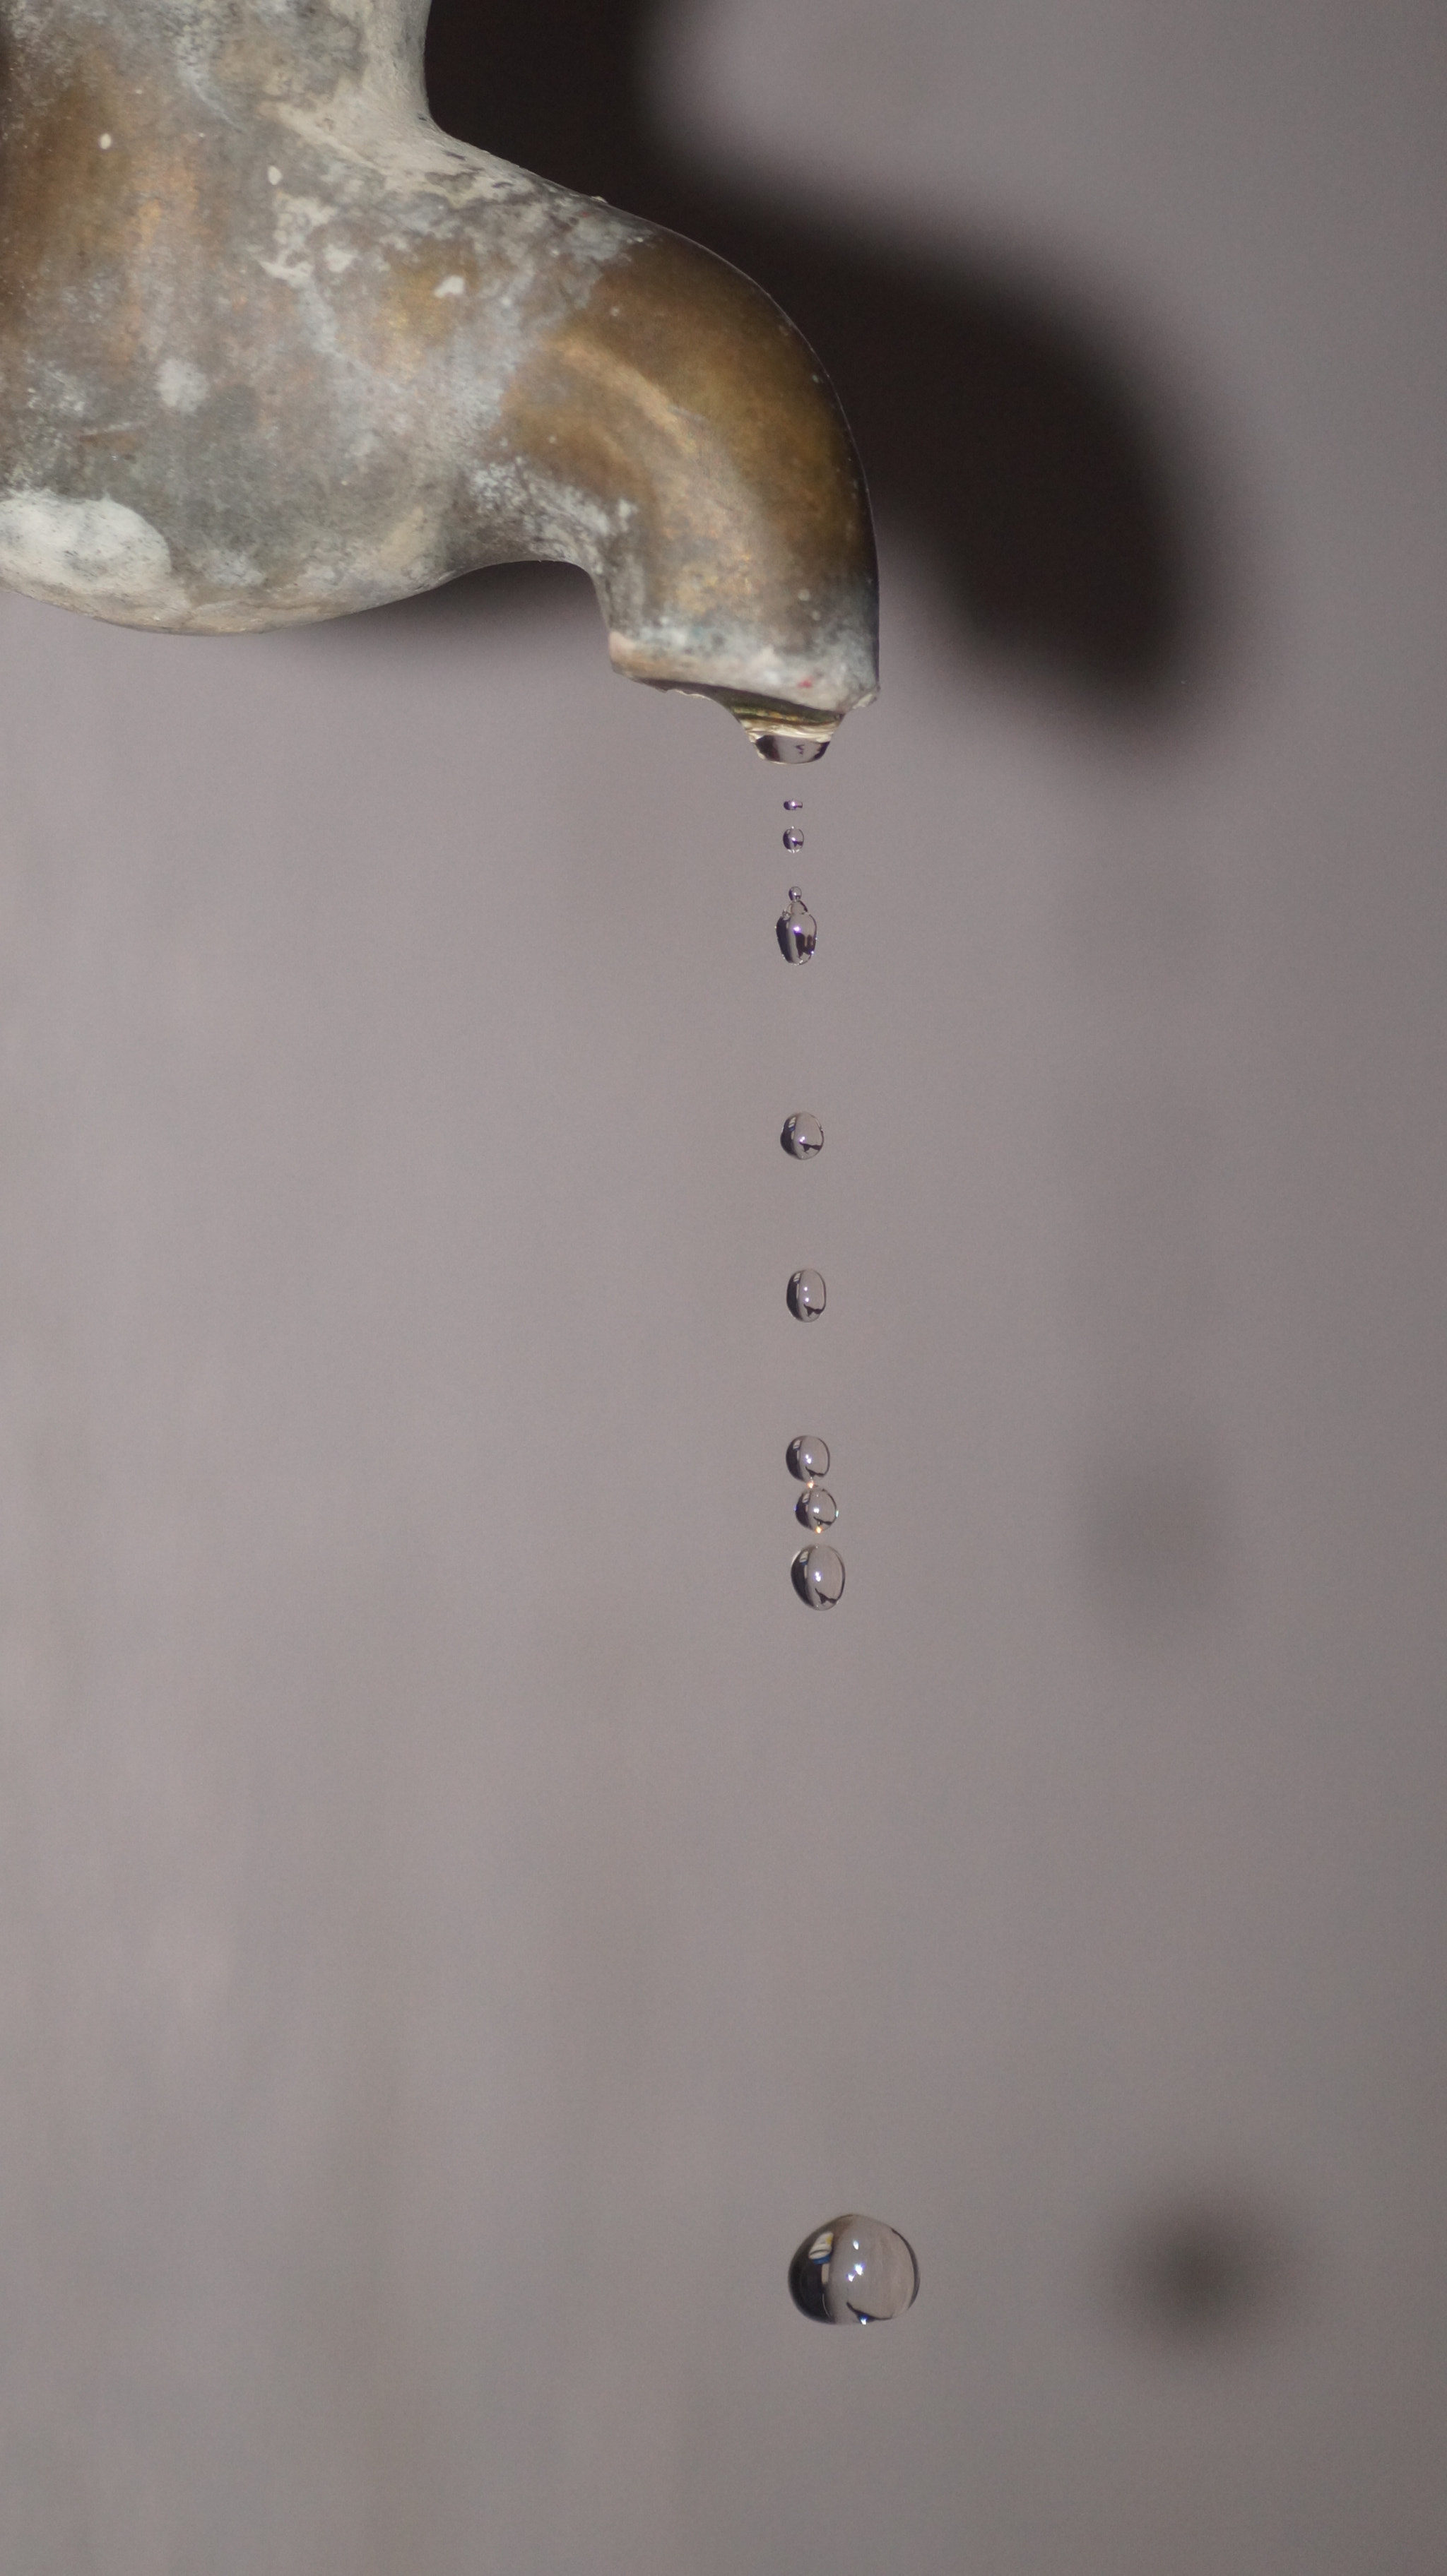 Sony SLT-A58 sample photo. Water drops photography